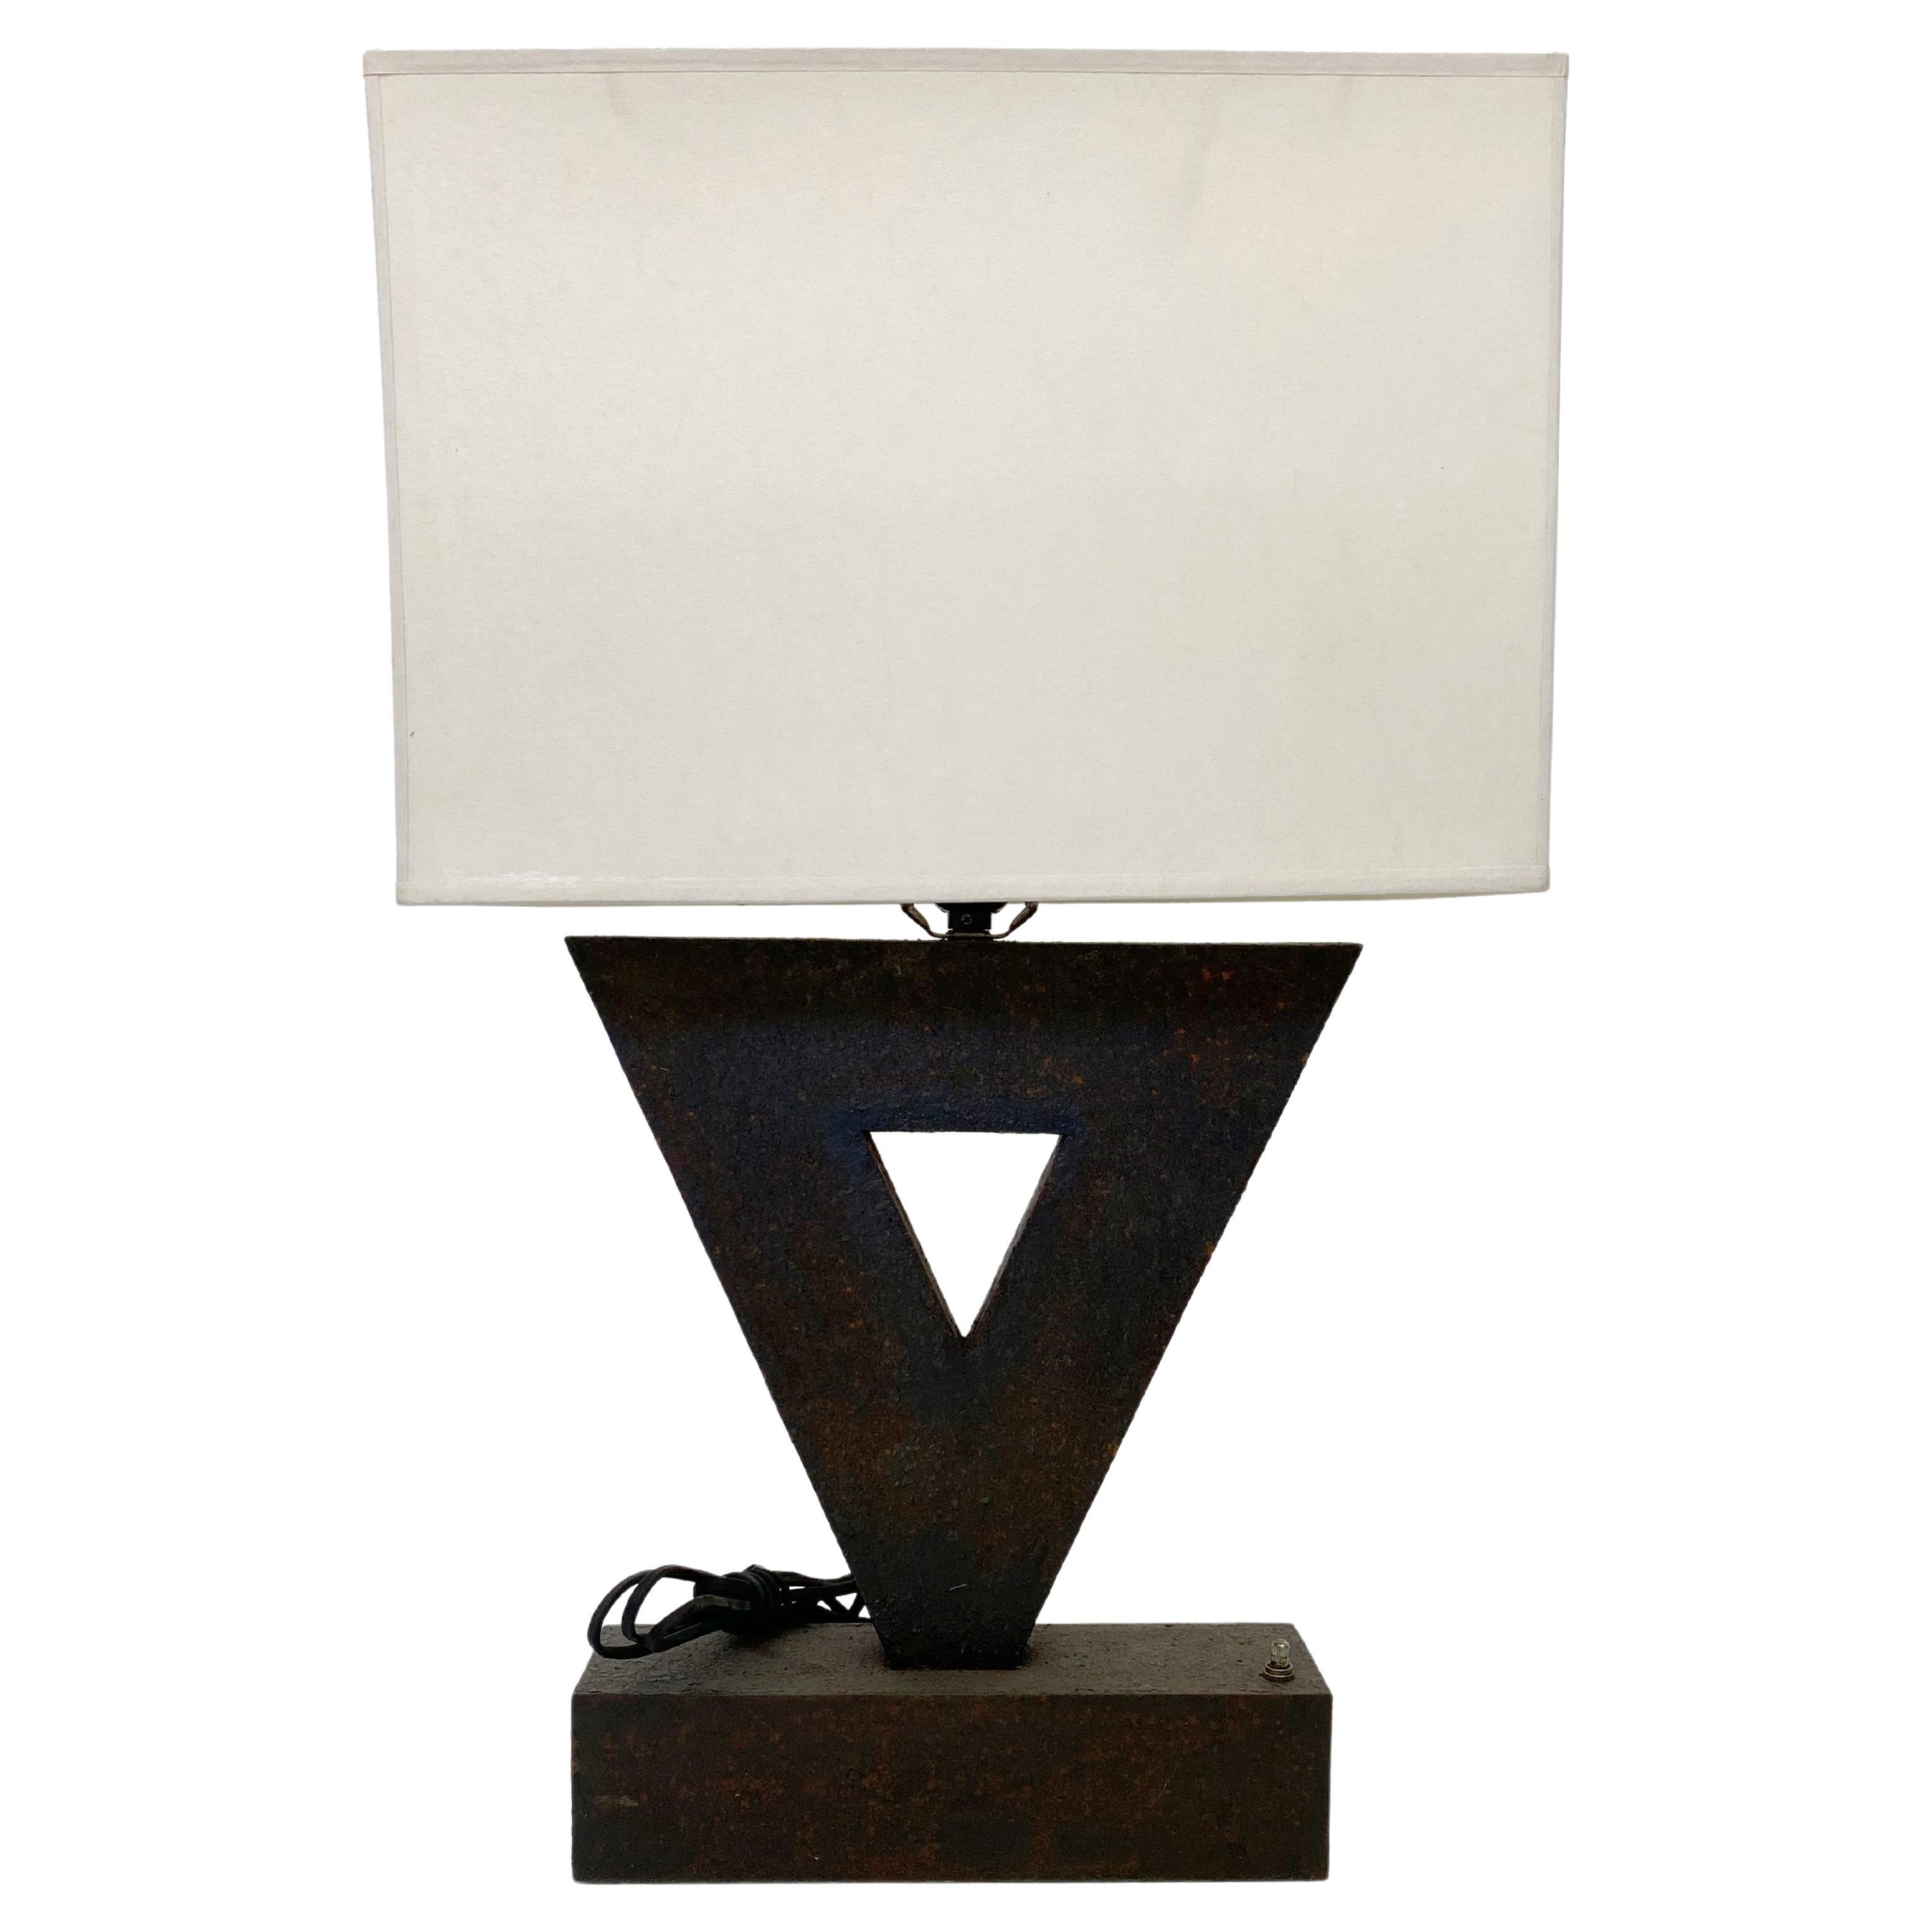 Custom made triangular oxidized iron table lamp designed by Juan Montoya. This geometric piece will add a unique look to any room. 

Property from esteemed interior designer Juan Montoya. Juan Montoya is one of the most acclaimed and prolific